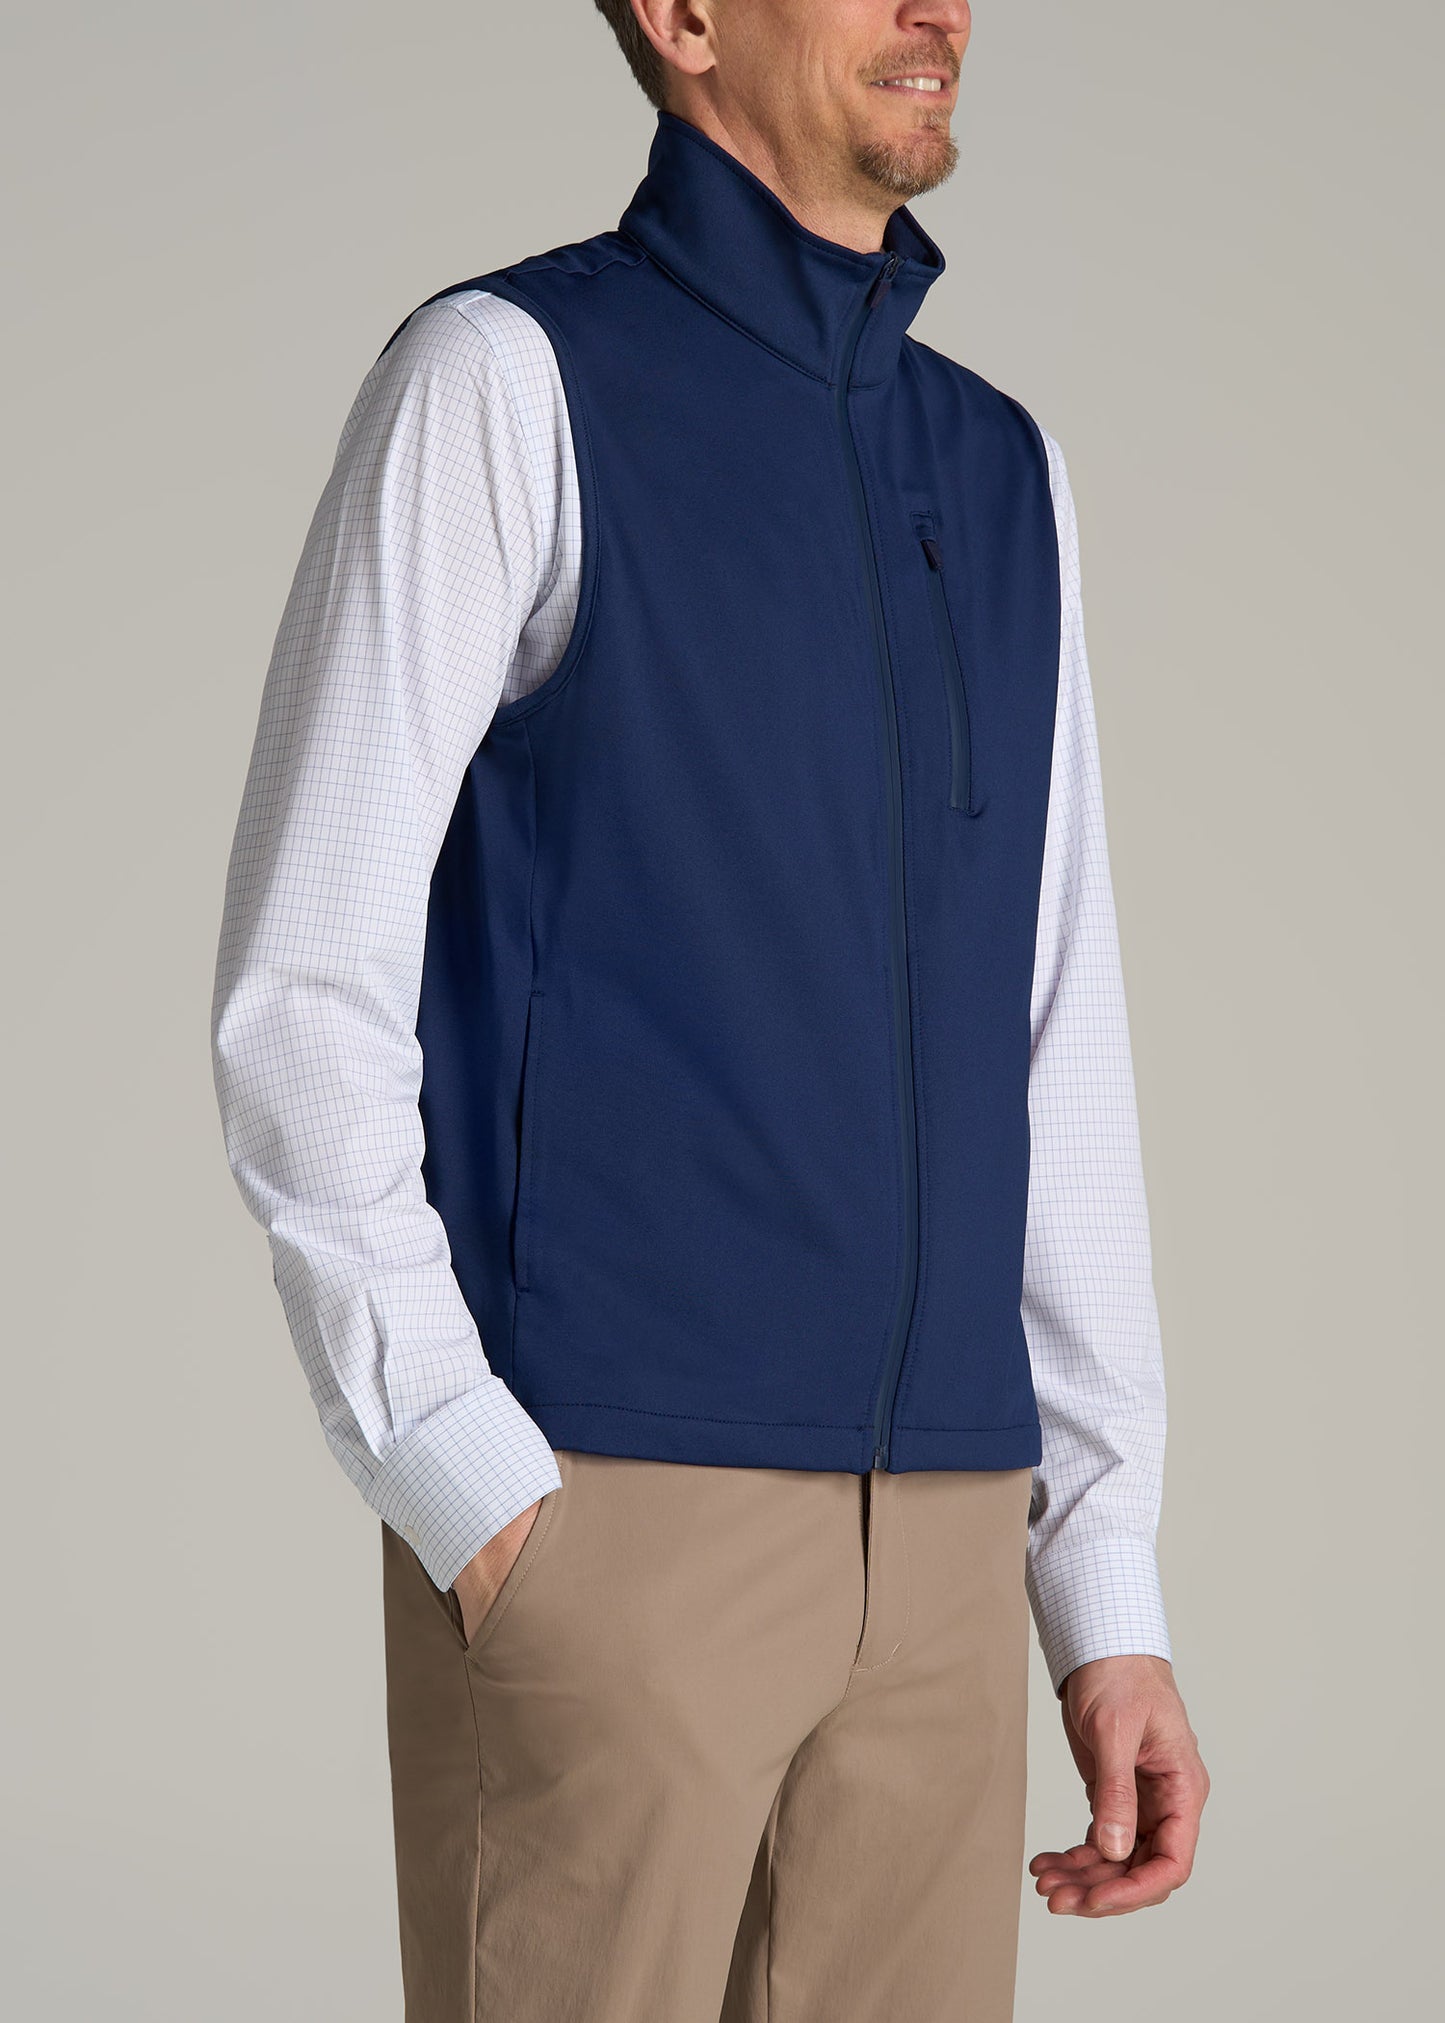 Performance Vest for Tall Men in Blue Mix